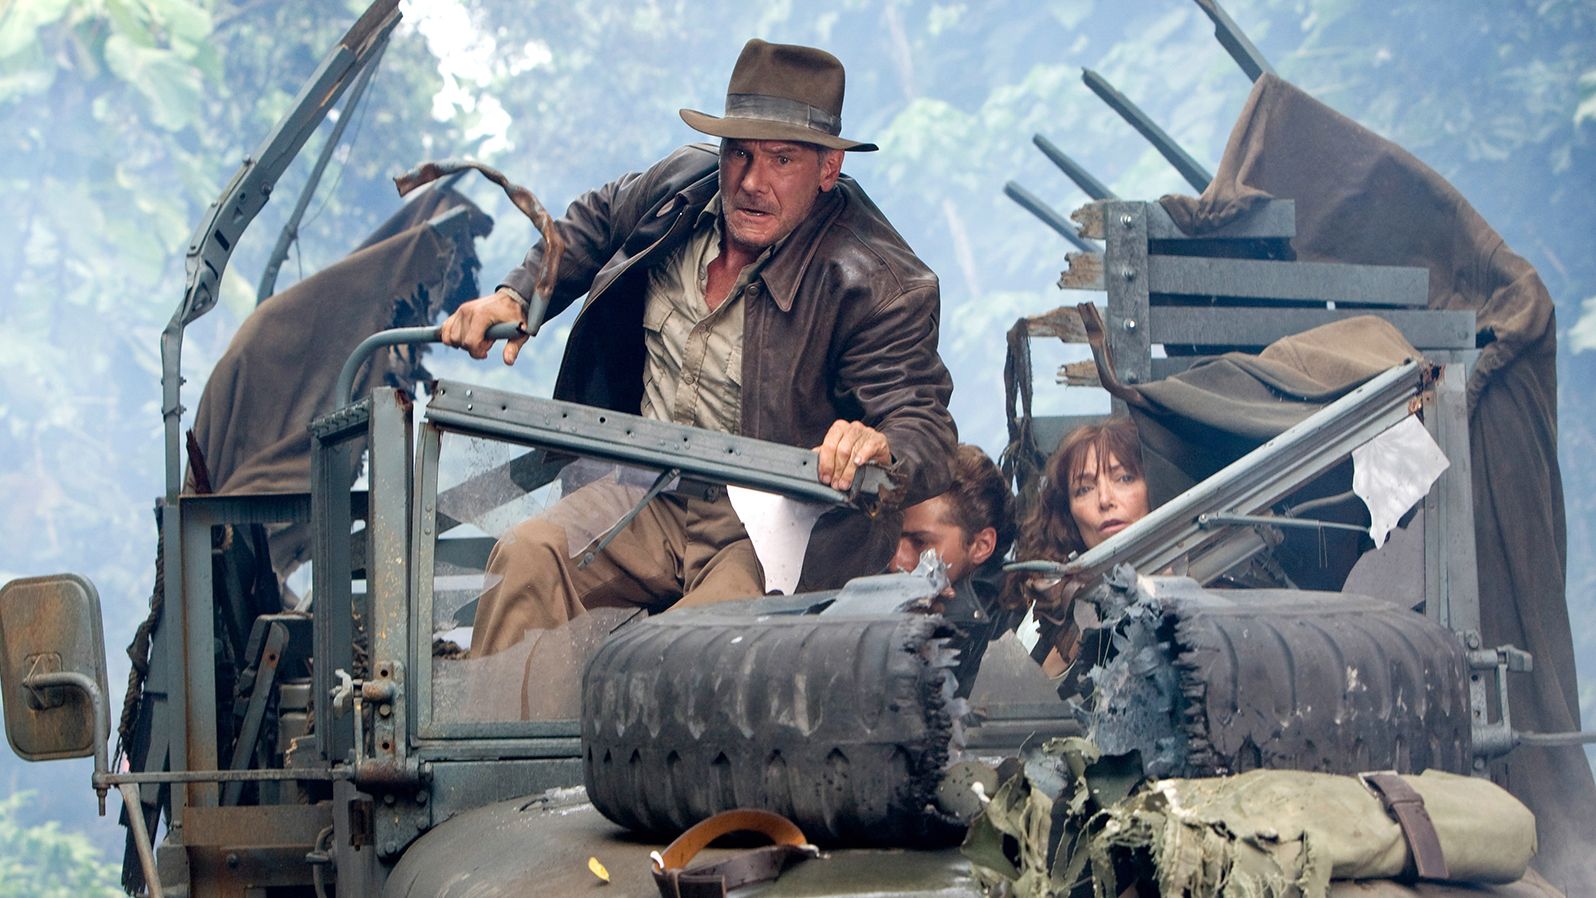 Harrison Ford, pictured here in the 2008 movie "Indiana Jones and the Kingdom of the Crystal Skull" is set to feature in a fifth installment next year.